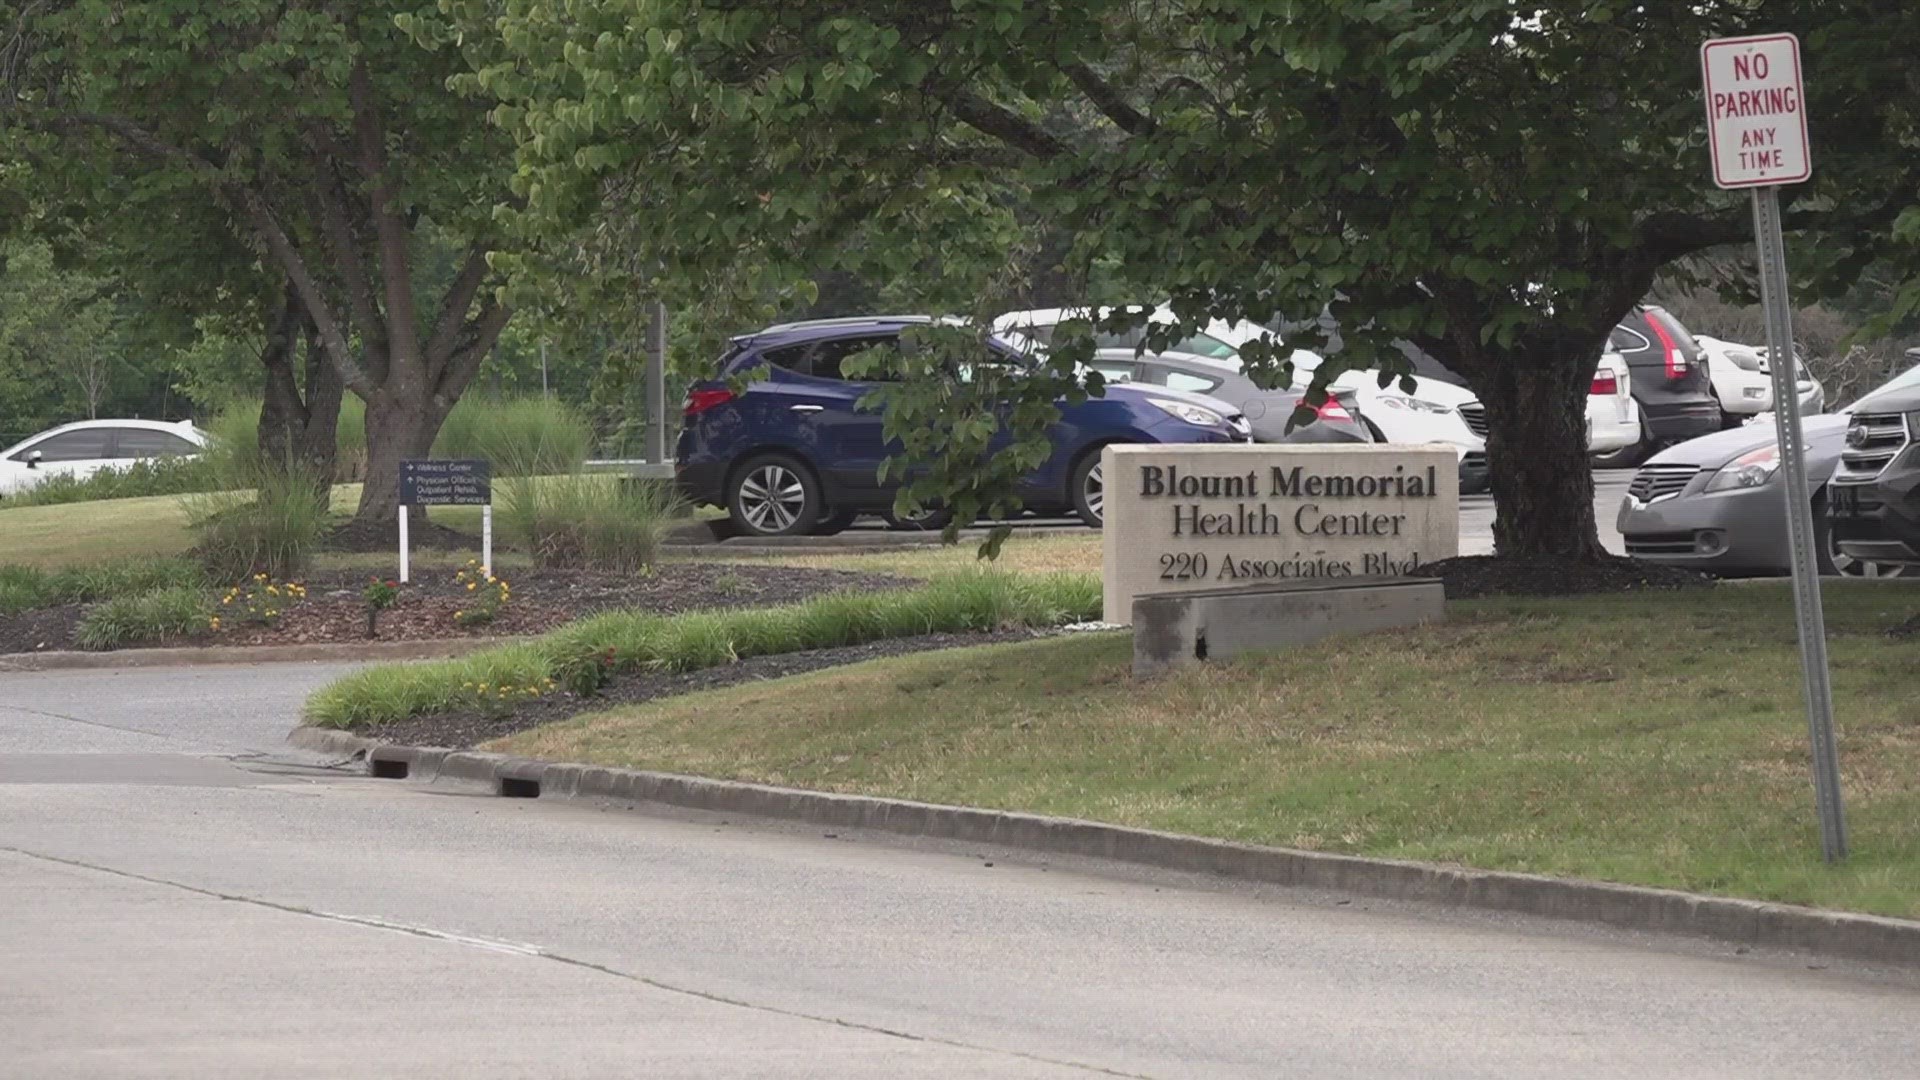 In November, the Blount County Commission voted to remove 3 members appointed by the county to the hospital board. Now, the county is fighting to remove 1 of them.